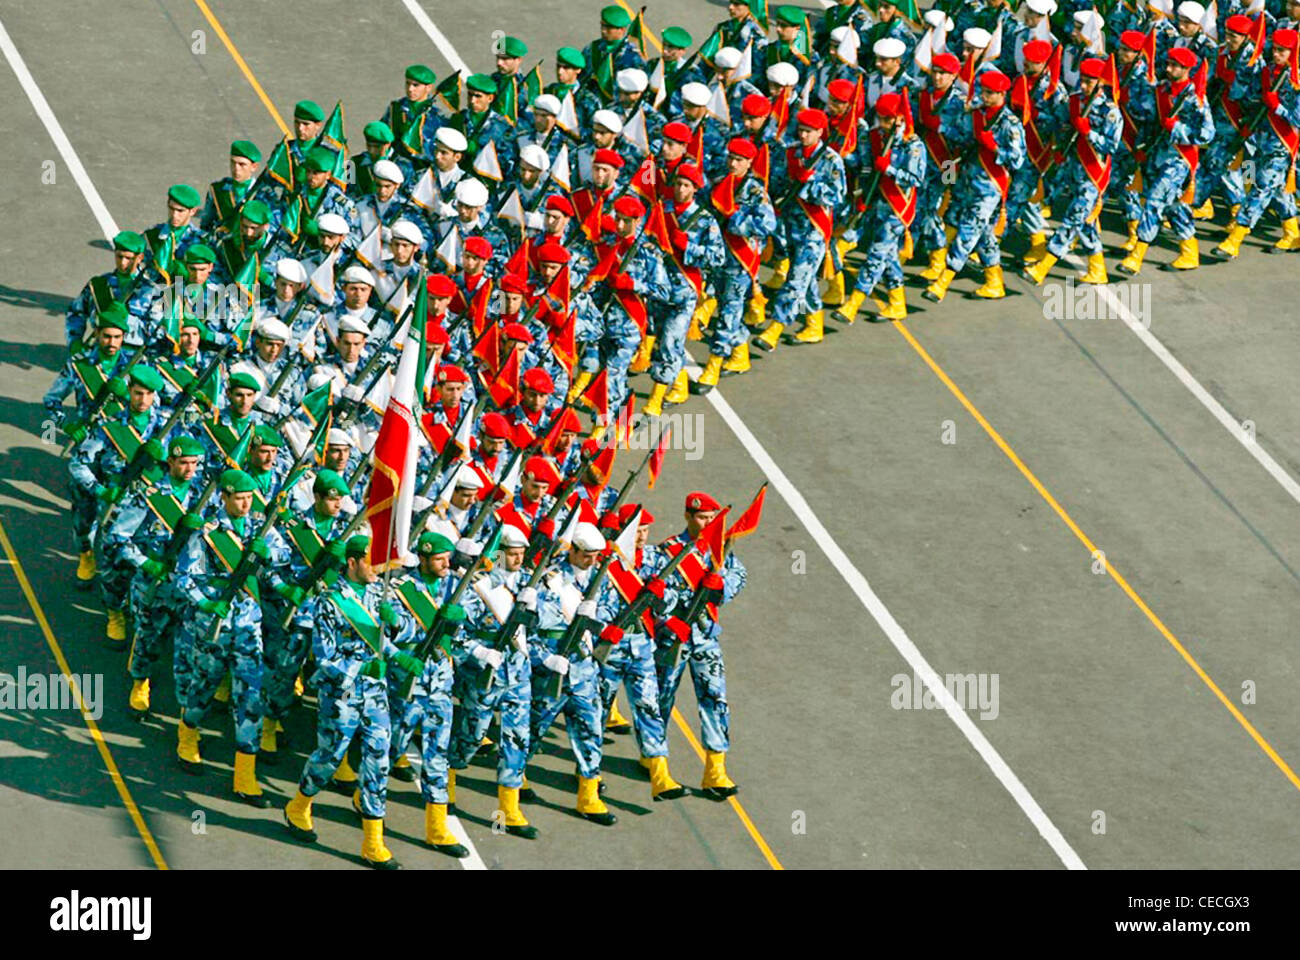 Military demonstration of the Iranian Army in Teheran. Stock Photo